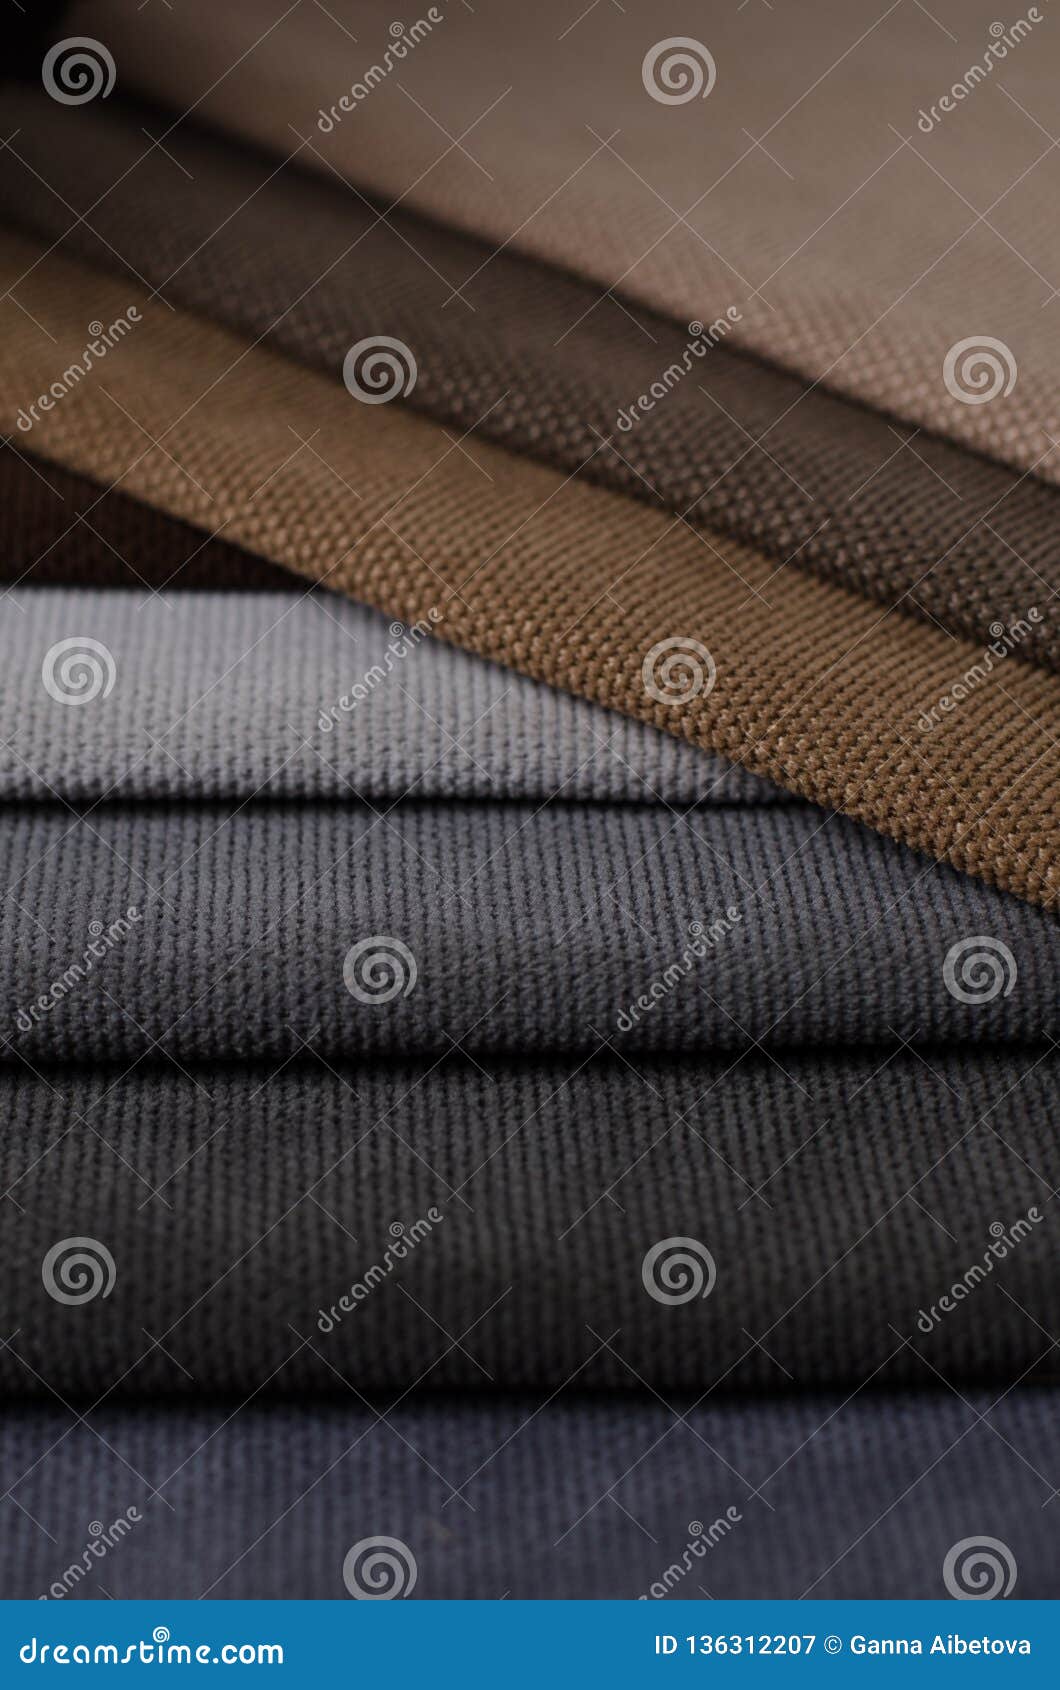 Bright Collection of Colorful Velour Textile Samples. Stock Image ...